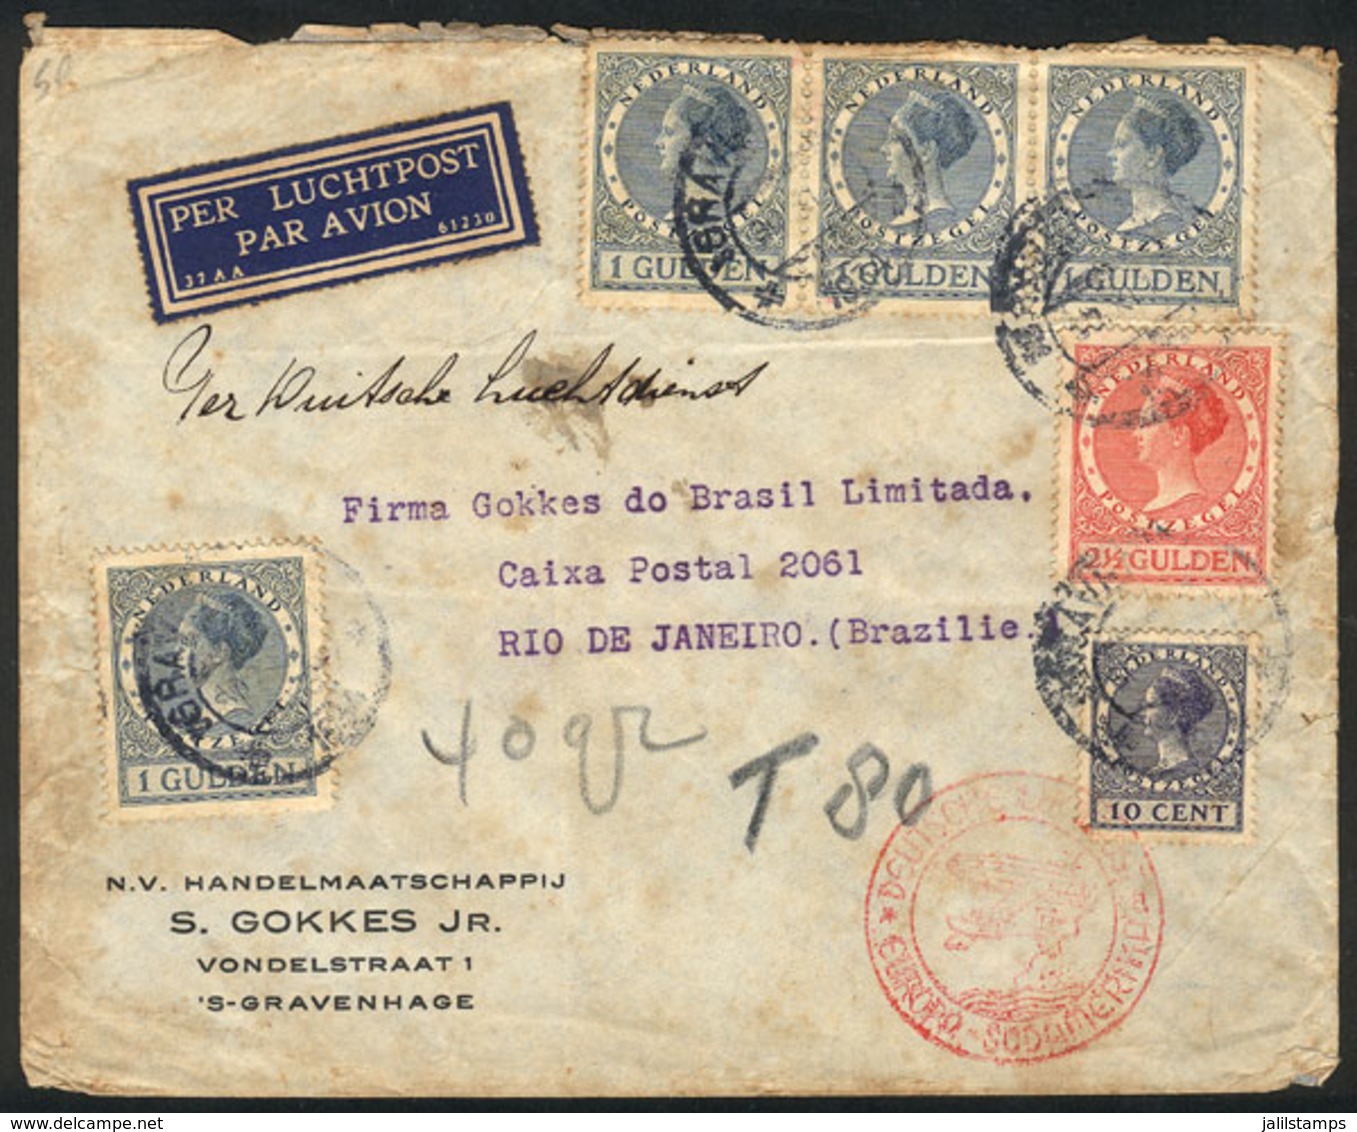 NETHERLANDS: Airmail Cover Sent From 's-Gravenhage To Brazil On 30/NO/1934 With Good Postage Of 6.60G., With Aging Spots - Marcophilie